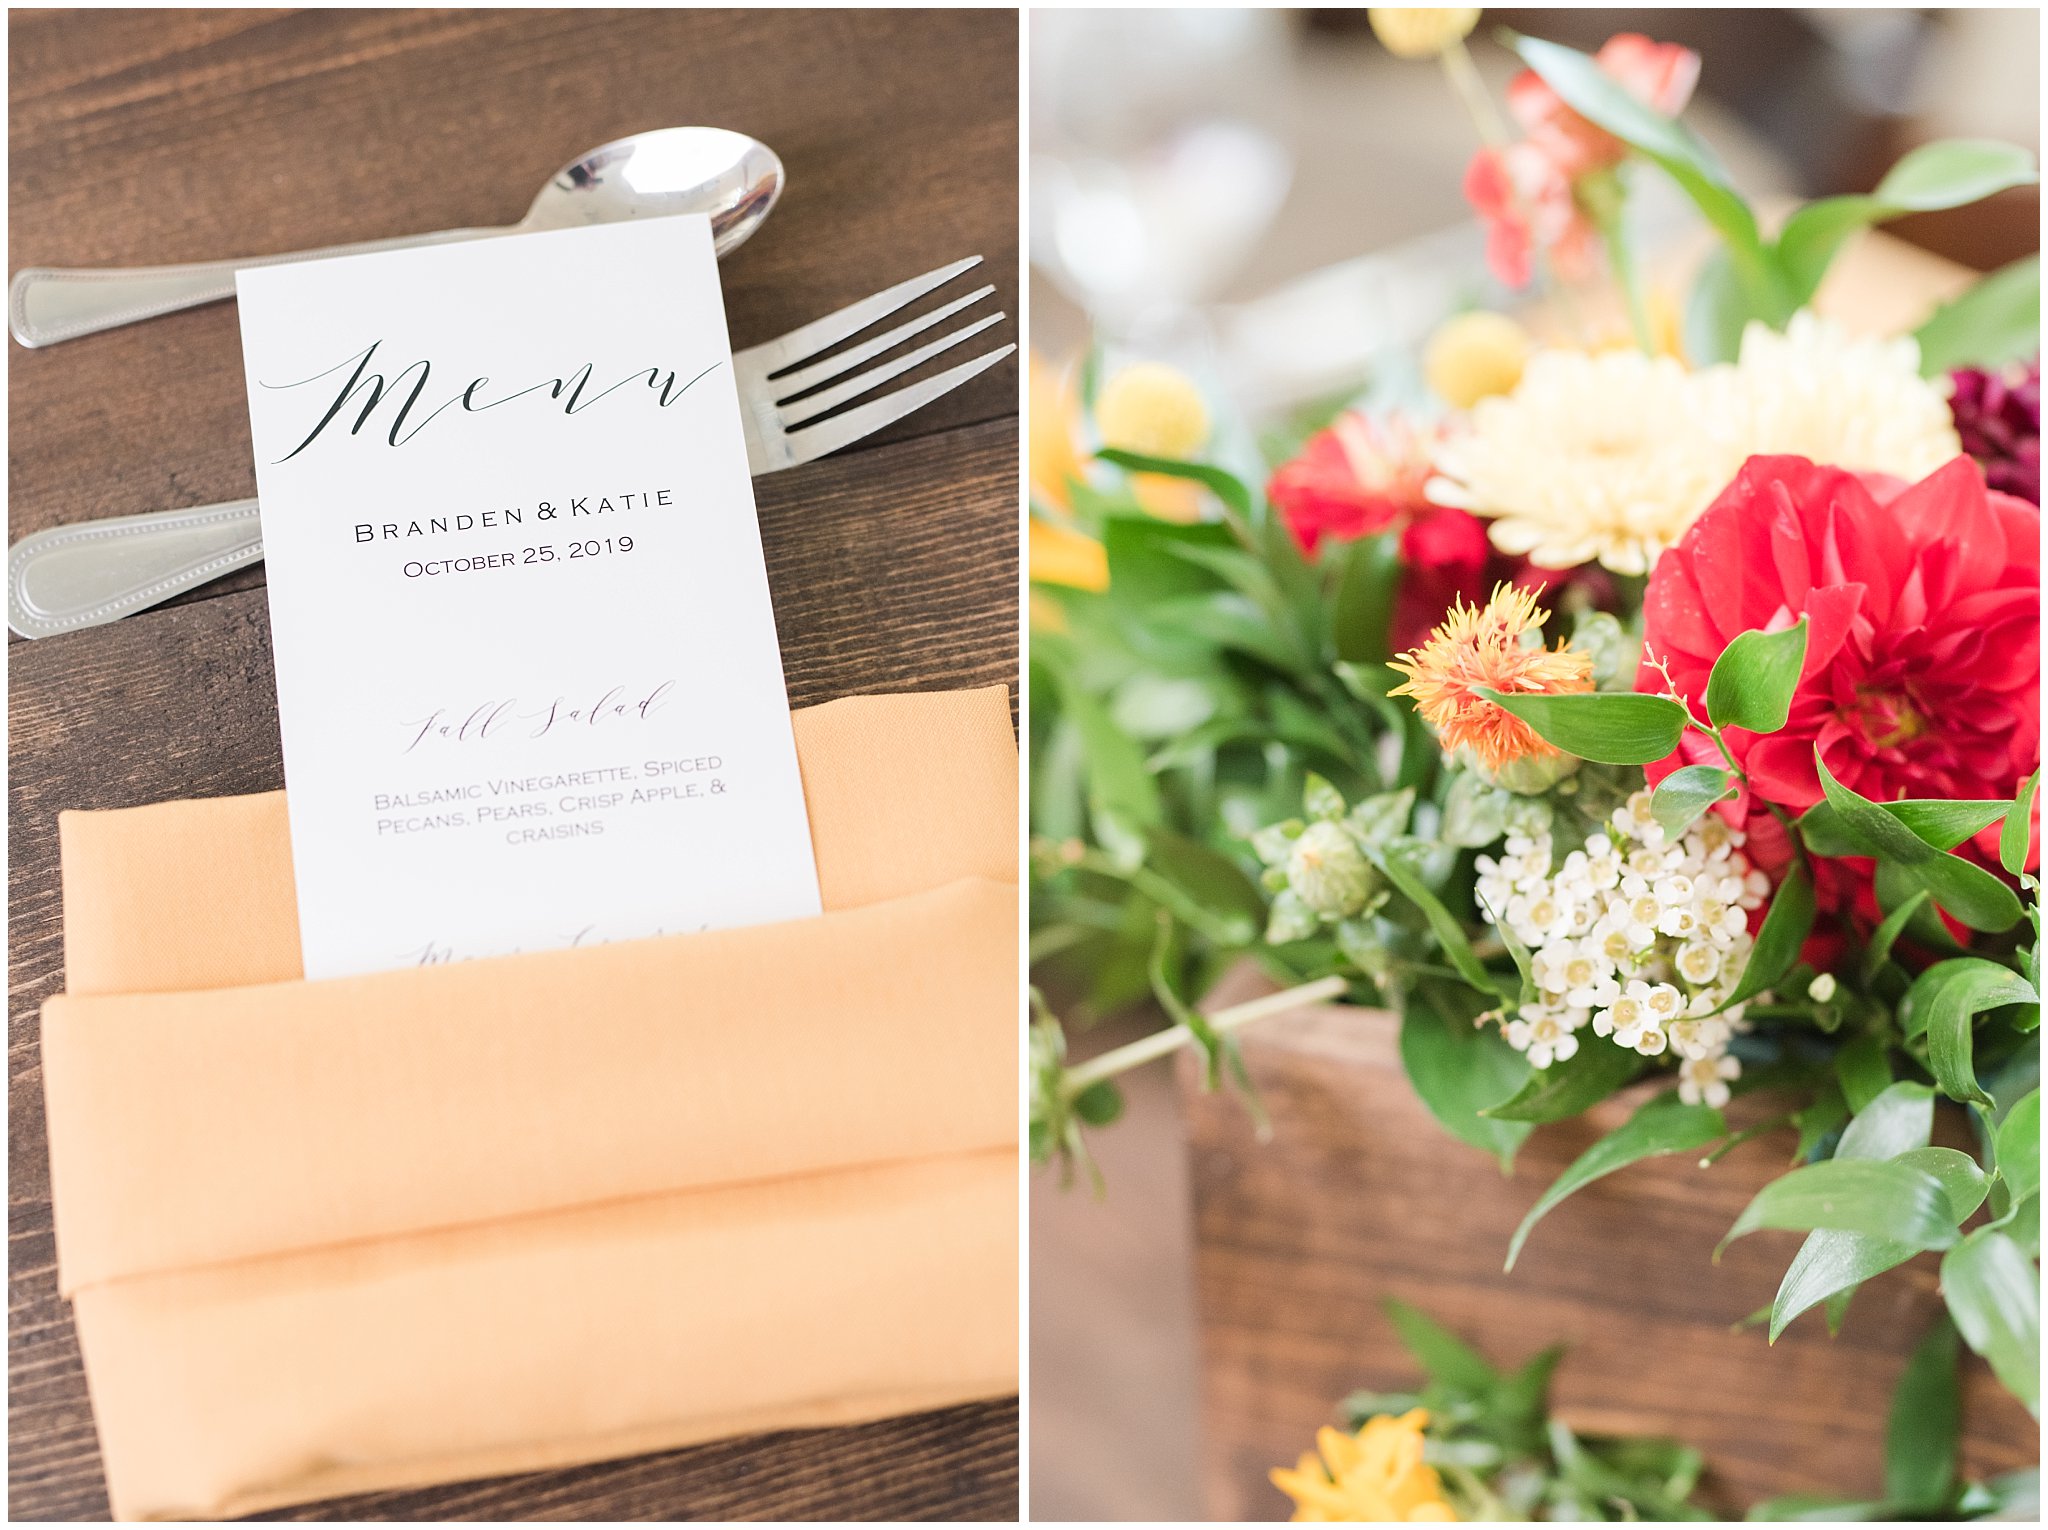 Menu and flowers at Birch Creek Country Club luncheon | Logan Temple Fall Wedding and Logan Country Club Reception | Jessie and Dallin Photography